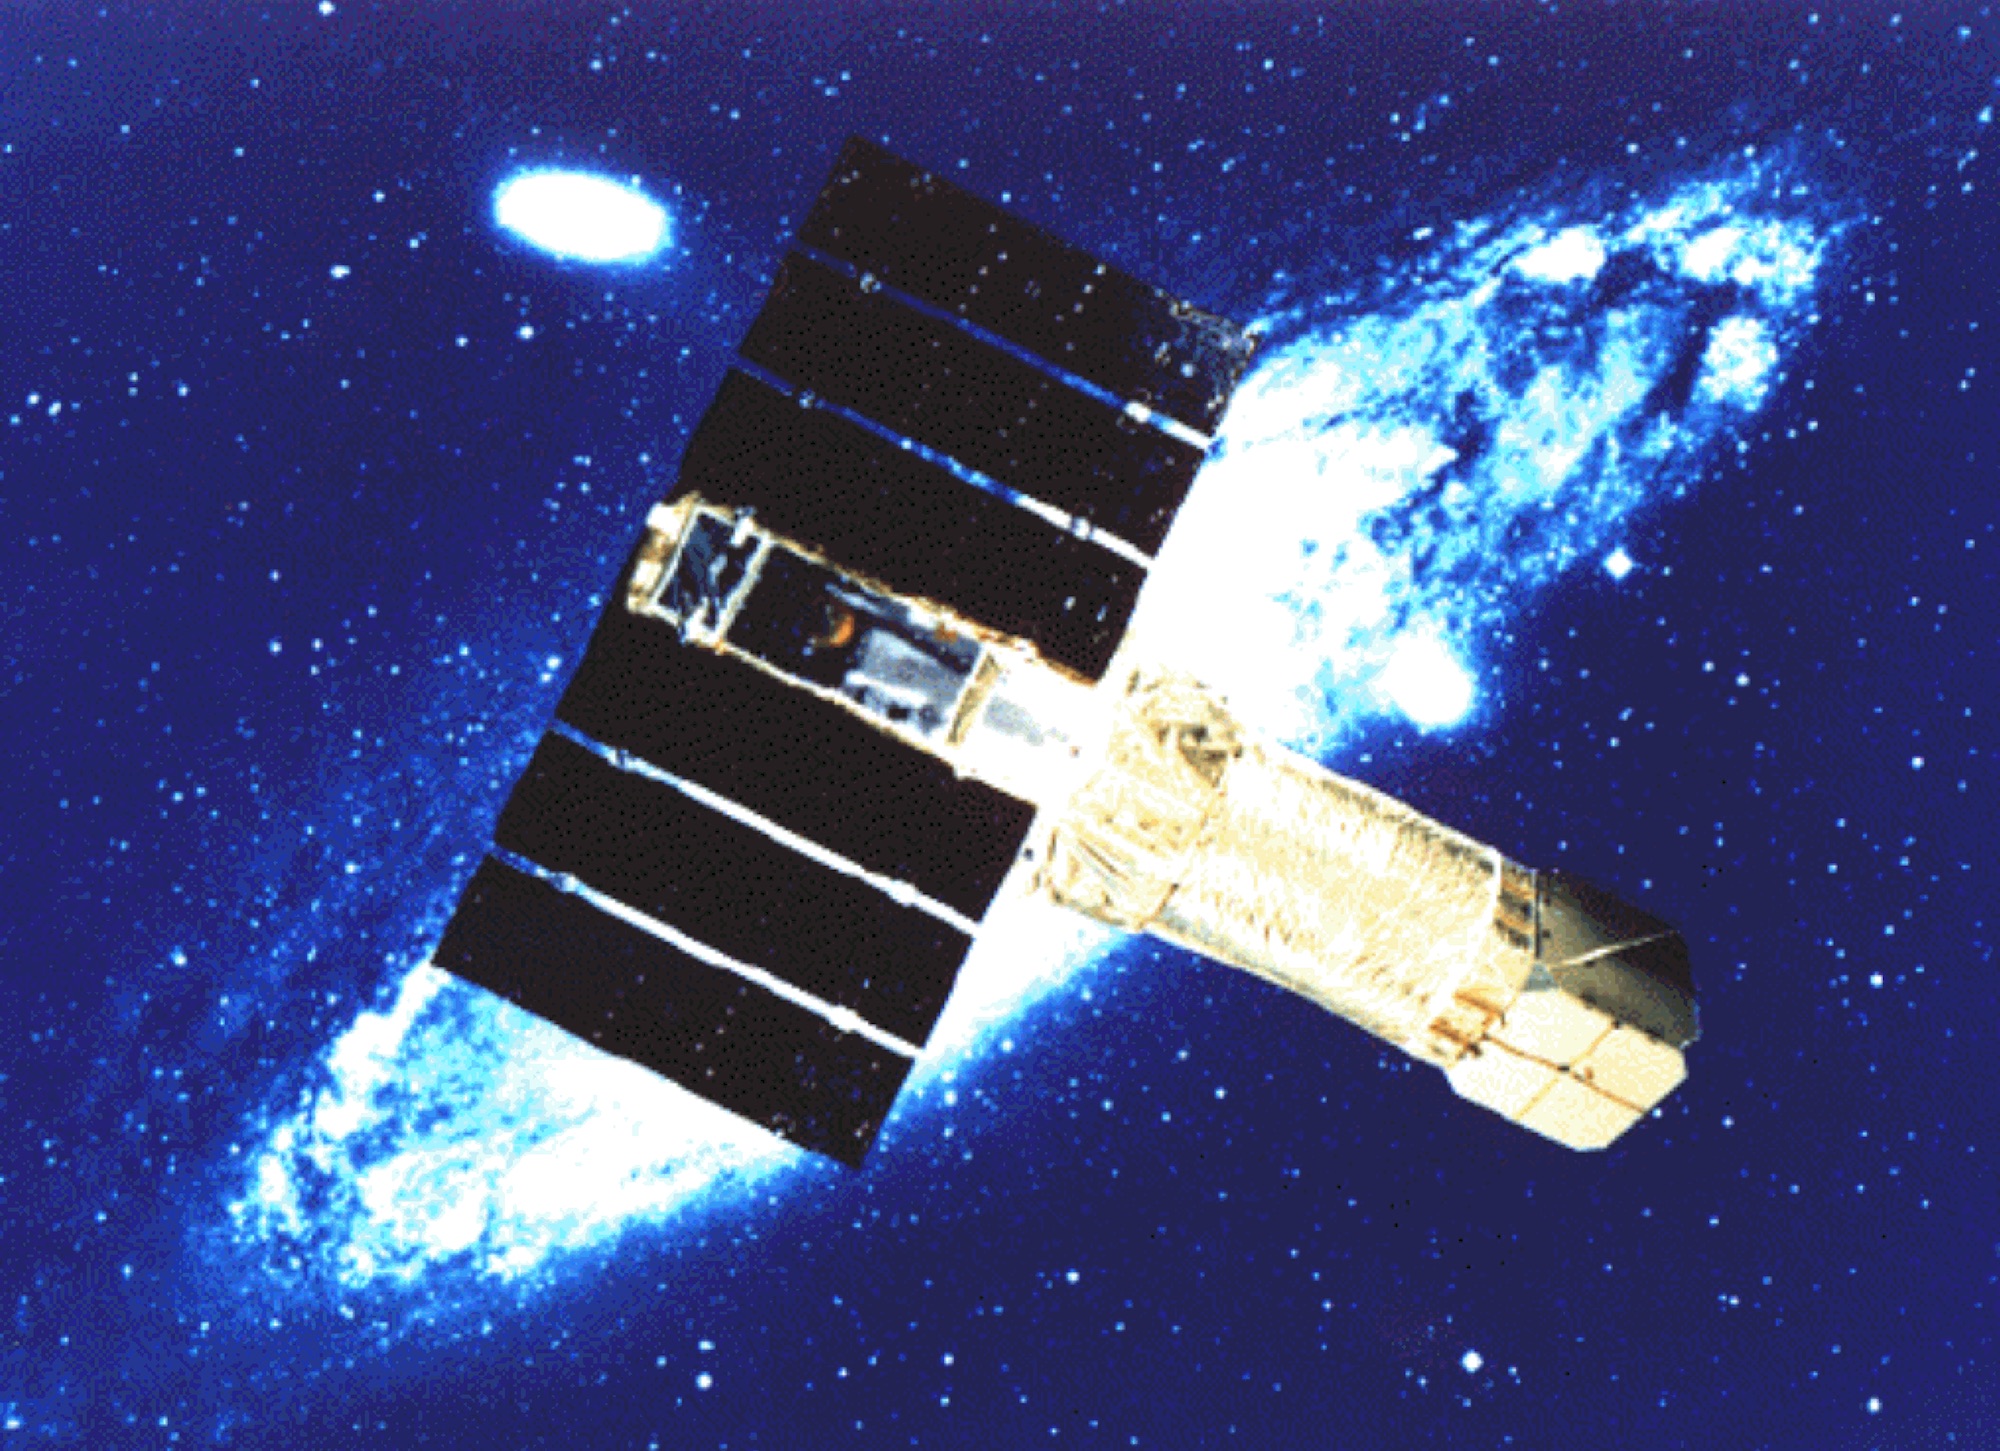 Illustration of the ASCA satellite in space